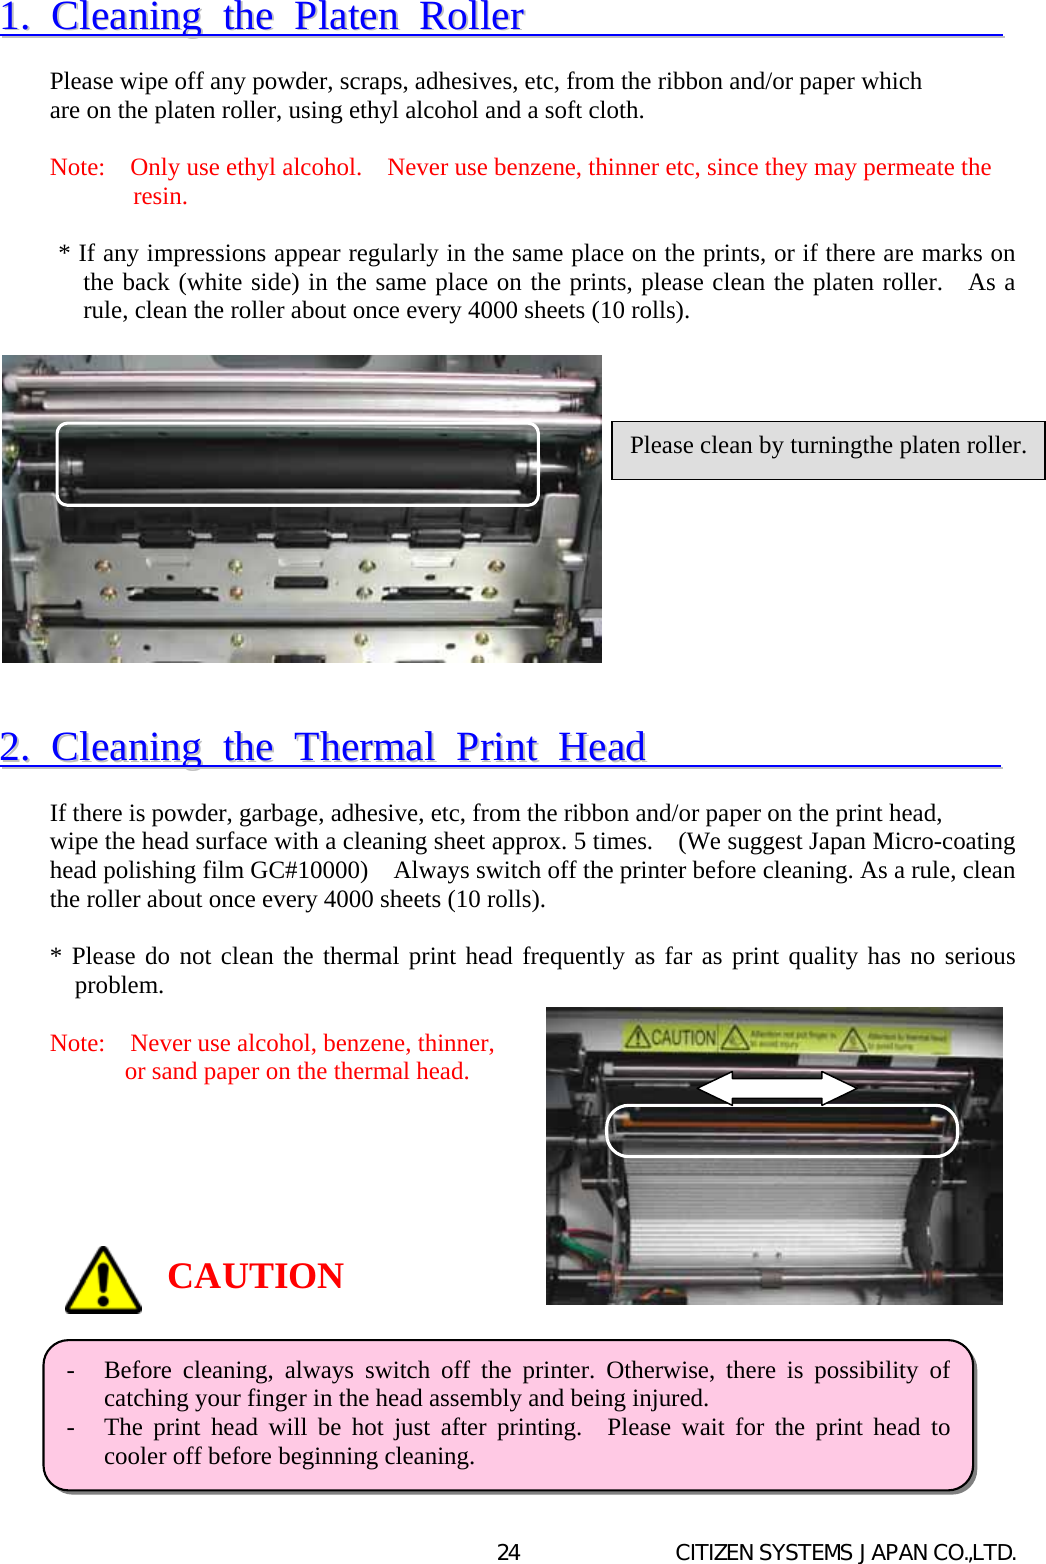   CITIZEN SYSTEMS JAPAN CO.,LTD. 2411..  CClleeaanniinngg  tthhee  PPllaatteenn  RRoolllleerr                                 Please wipe off any powder, scraps, adhesives, etc, from the ribbon and/or paper which   are on the platen roller, using ethyl alcohol and a soft cloth.  Note:    Only use ethyl alcohol.    Never use benzene, thinner etc, since they may permeate the   resin.  * If any impressions appear regularly in the same place on the prints, or if there are marks on the back (white side) in the same place on the prints, please clean the platen roller.   As a rule, clean the roller about once every 4000 sheets (10 rolls).               22..  CClleeaanniinngg  tthhee  TThheerrmmaall  PPrriinntt  HHeeaadd                         If there is powder, garbage, adhesive, etc, from the ribbon and/or paper on the print head,   wipe the head surface with a cleaning sheet approx. 5 times.    (We suggest Japan Micro-coating head polishing film GC#10000)    Always switch off the printer before cleaning. As a rule, clean the roller about once every 4000 sheets (10 rolls).  * Please do not clean the thermal print head frequently as far as print quality has no serious problem.  Note:    Never use alcohol, benzene, thinner,   or sand paper on the thermal head.                Please clean by turningthe platen roller.-  Before cleaning, always switch off the printer. Otherwise, there is possibility ofcatching your finger in the head assembly and being injured. -  The print head will be hot just after printing.  Please wait for the print head tocooler off before beginning cleaning.   CAUTION 